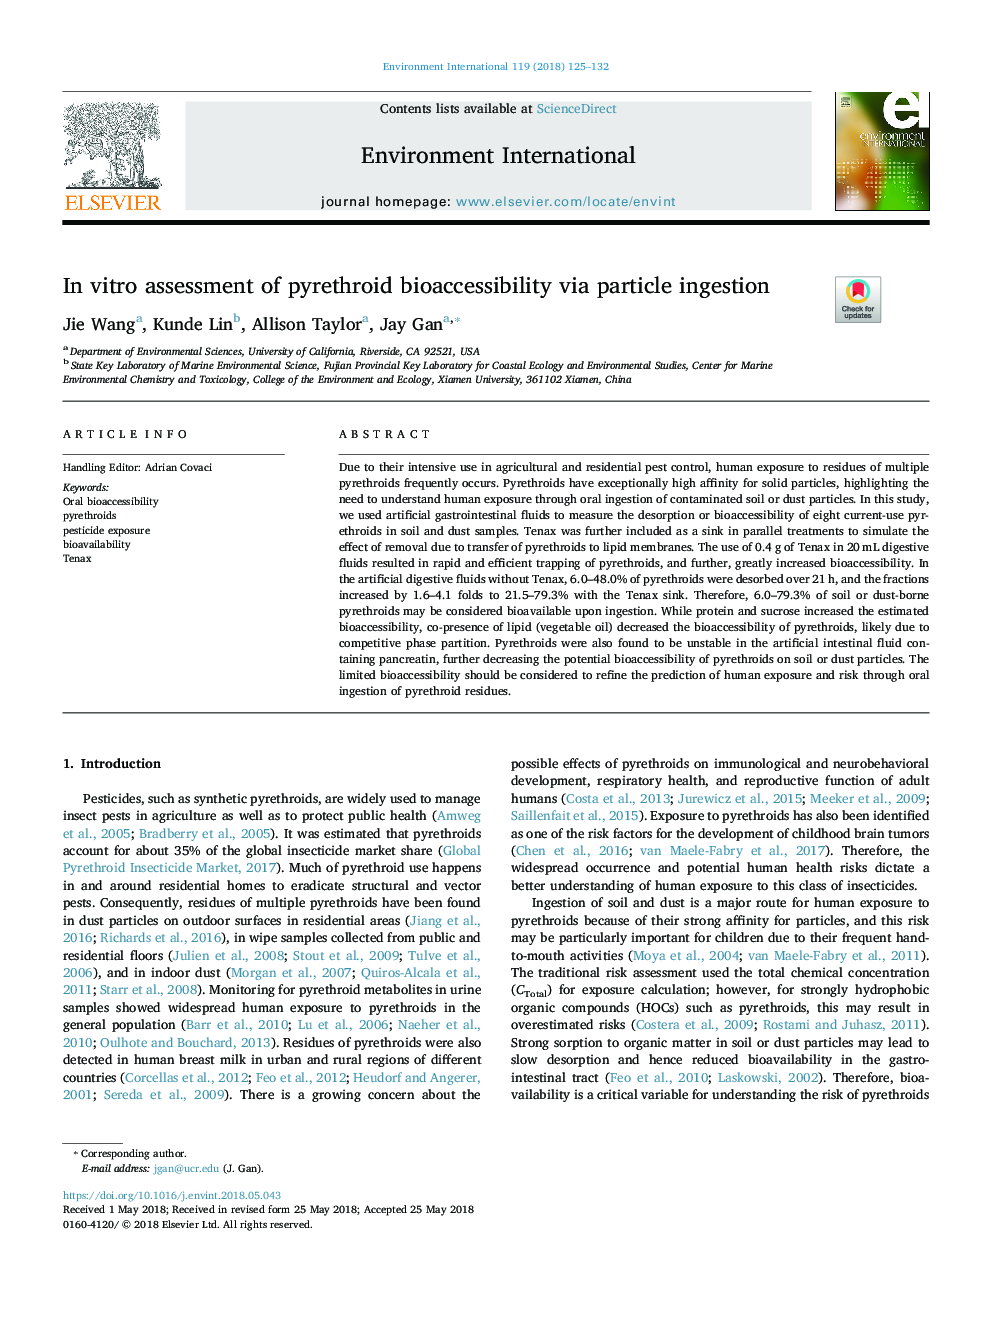 In vitro assessment of pyrethroid bioaccessibility via particle ingestion